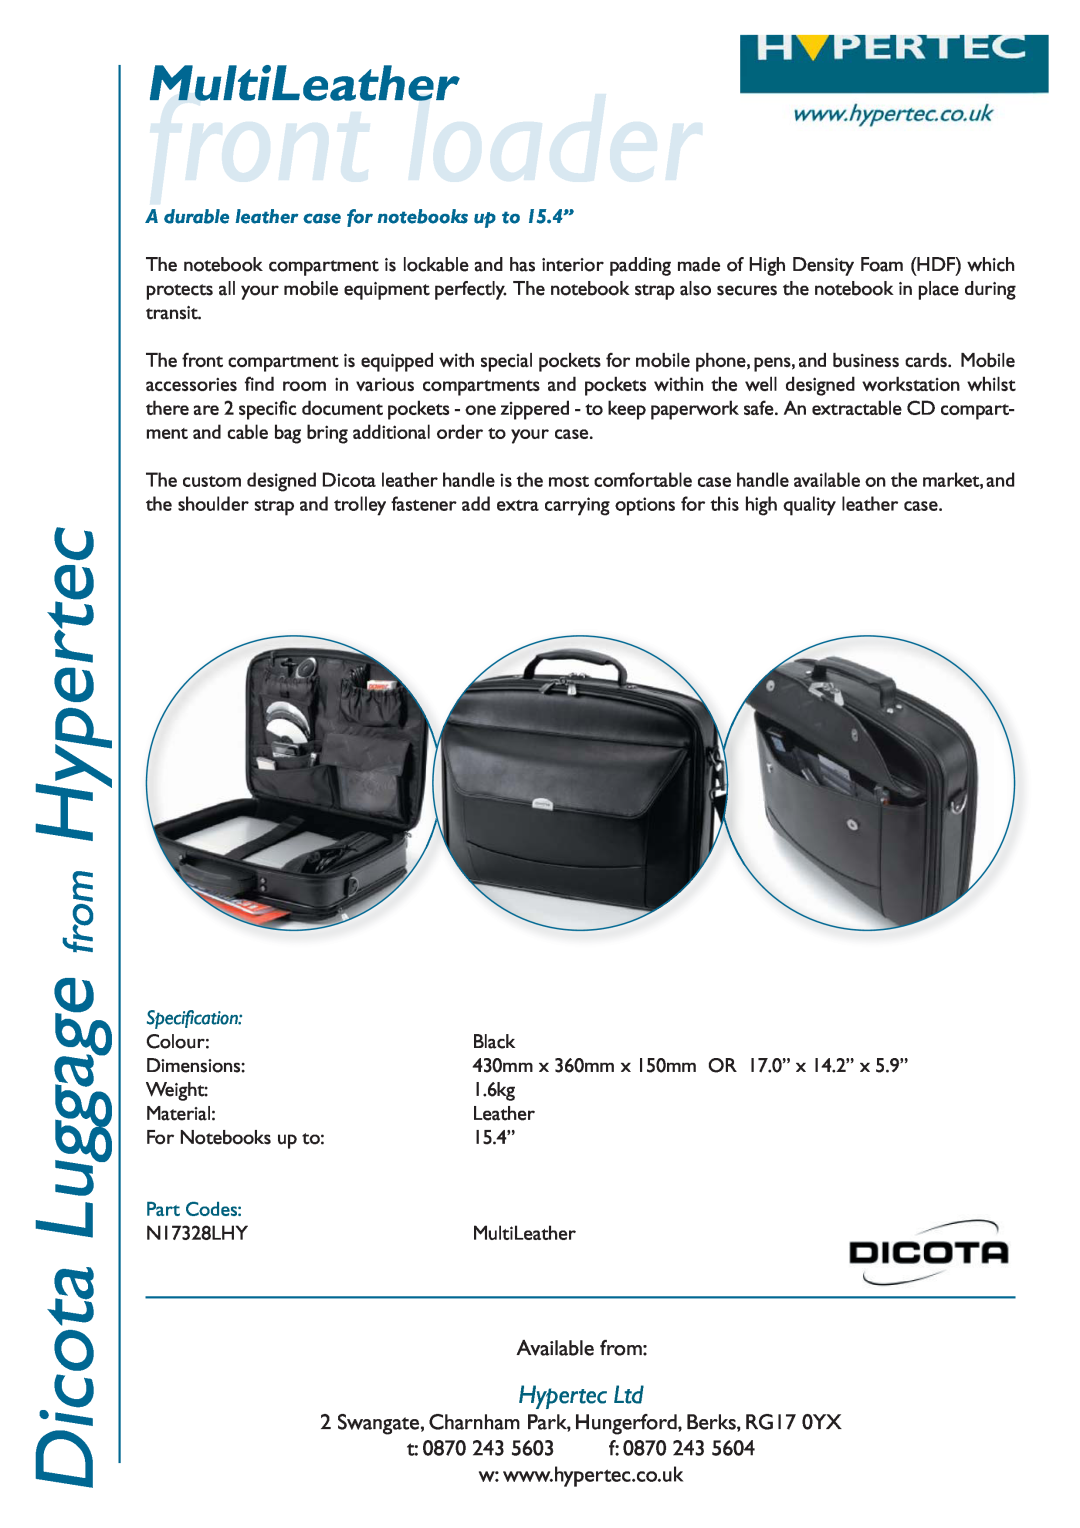 Hypertec N17328LHY dimensions front loader, Dicota Luggage from Hypertec, MultiLeather, Available from, t 0870 243 